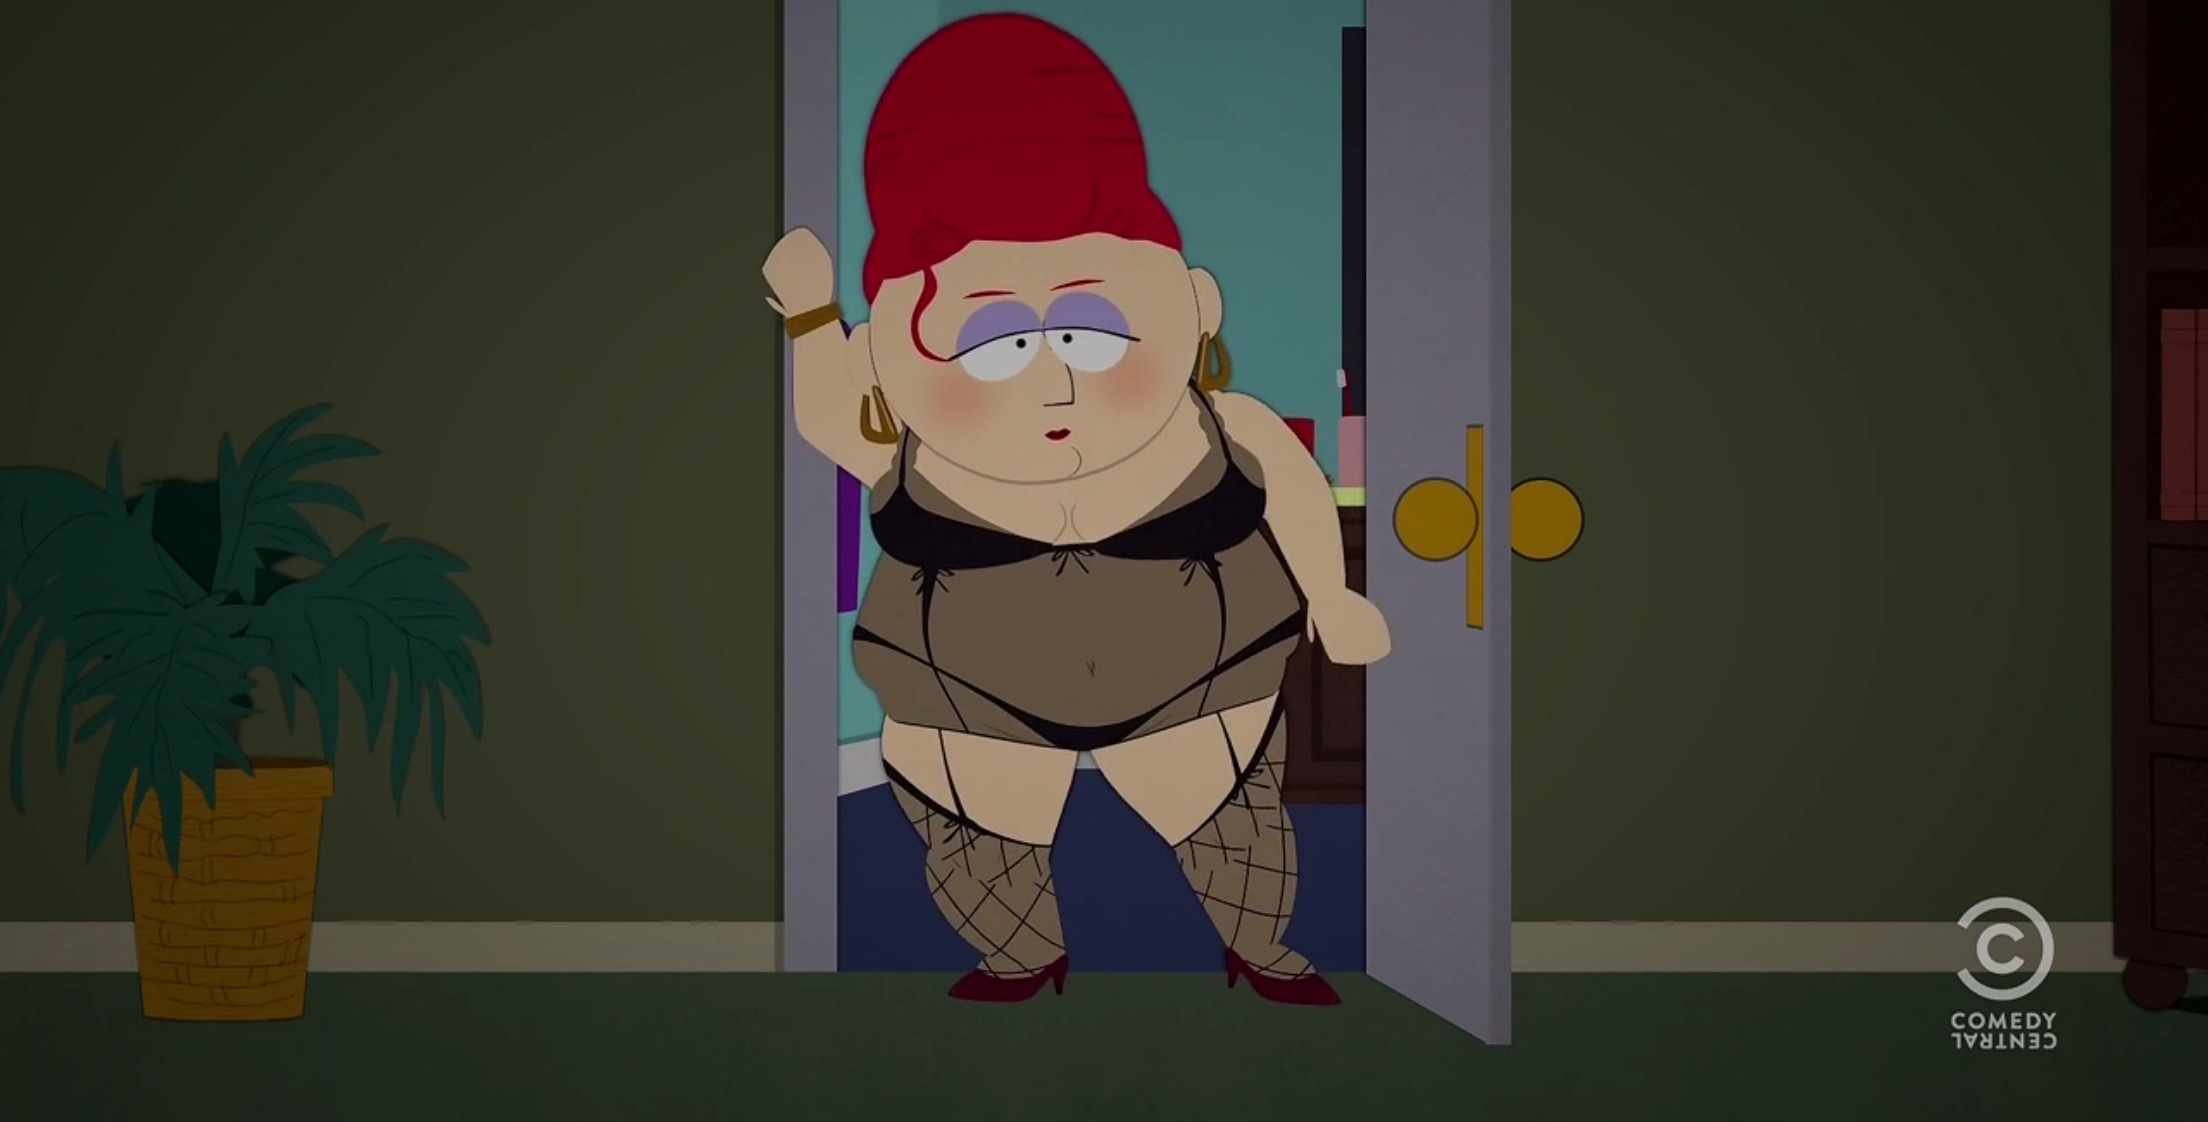 South Park - "Wieners Out" .